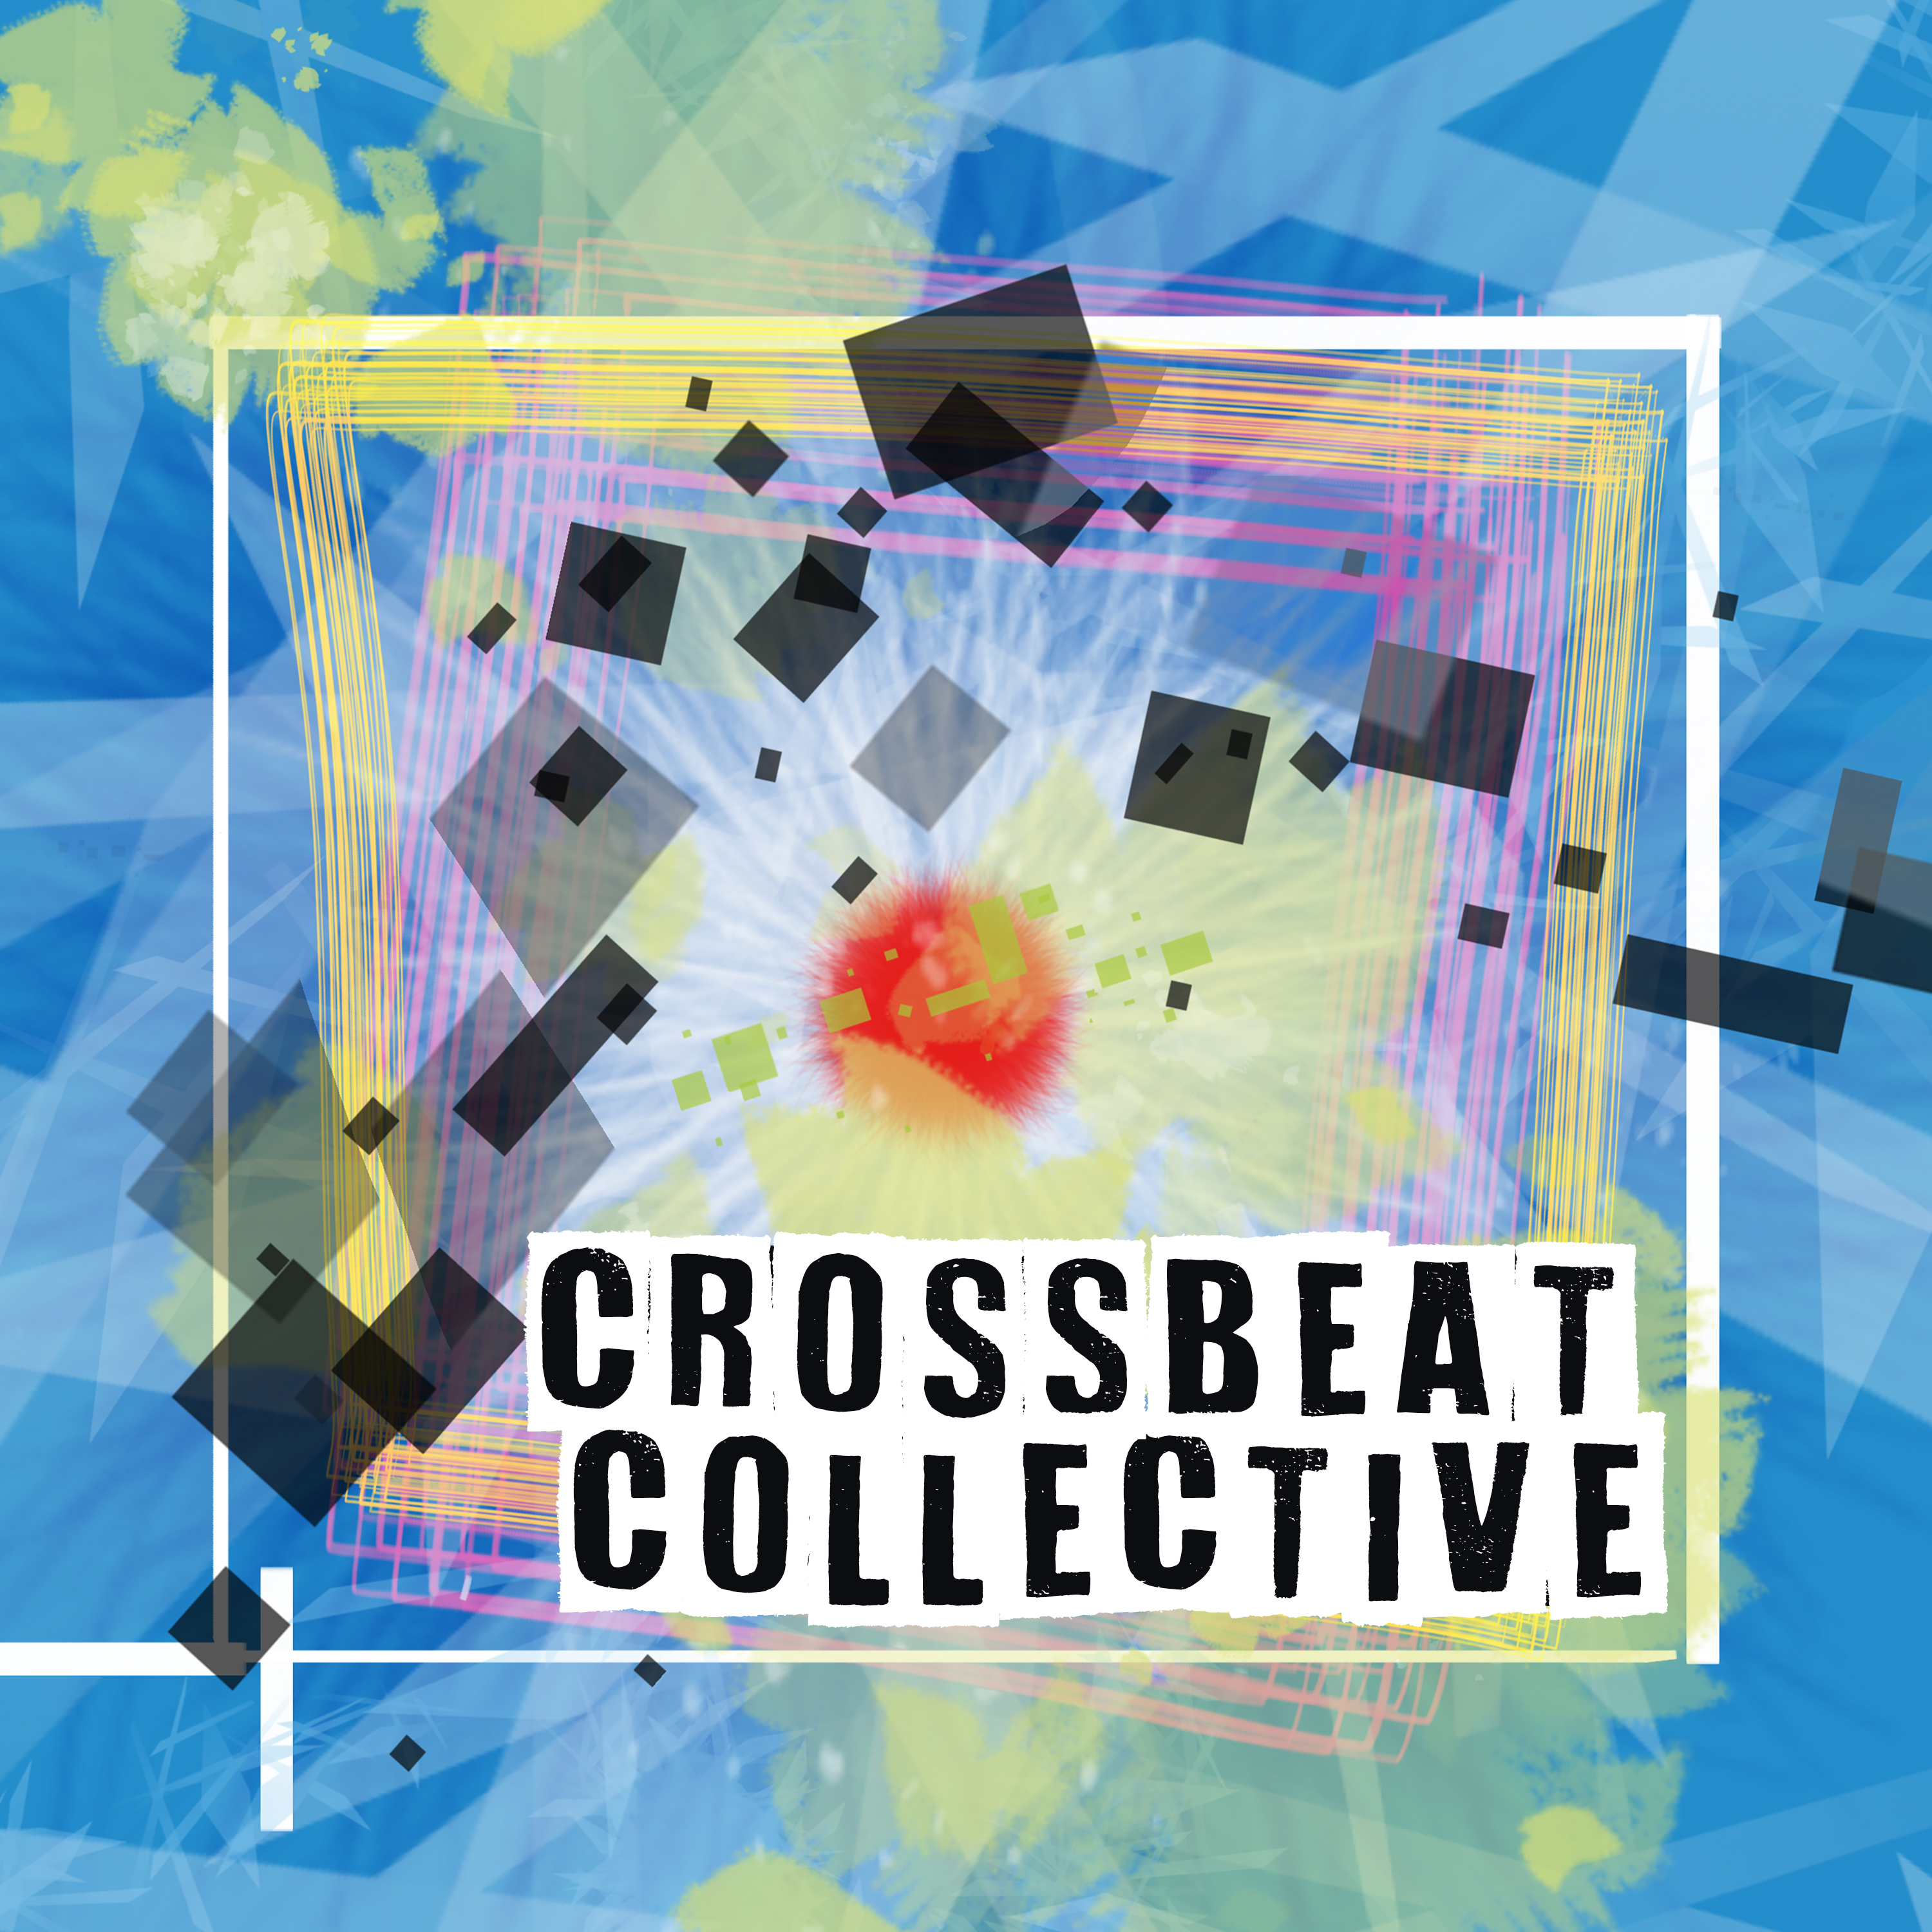 Crossbeat Collective